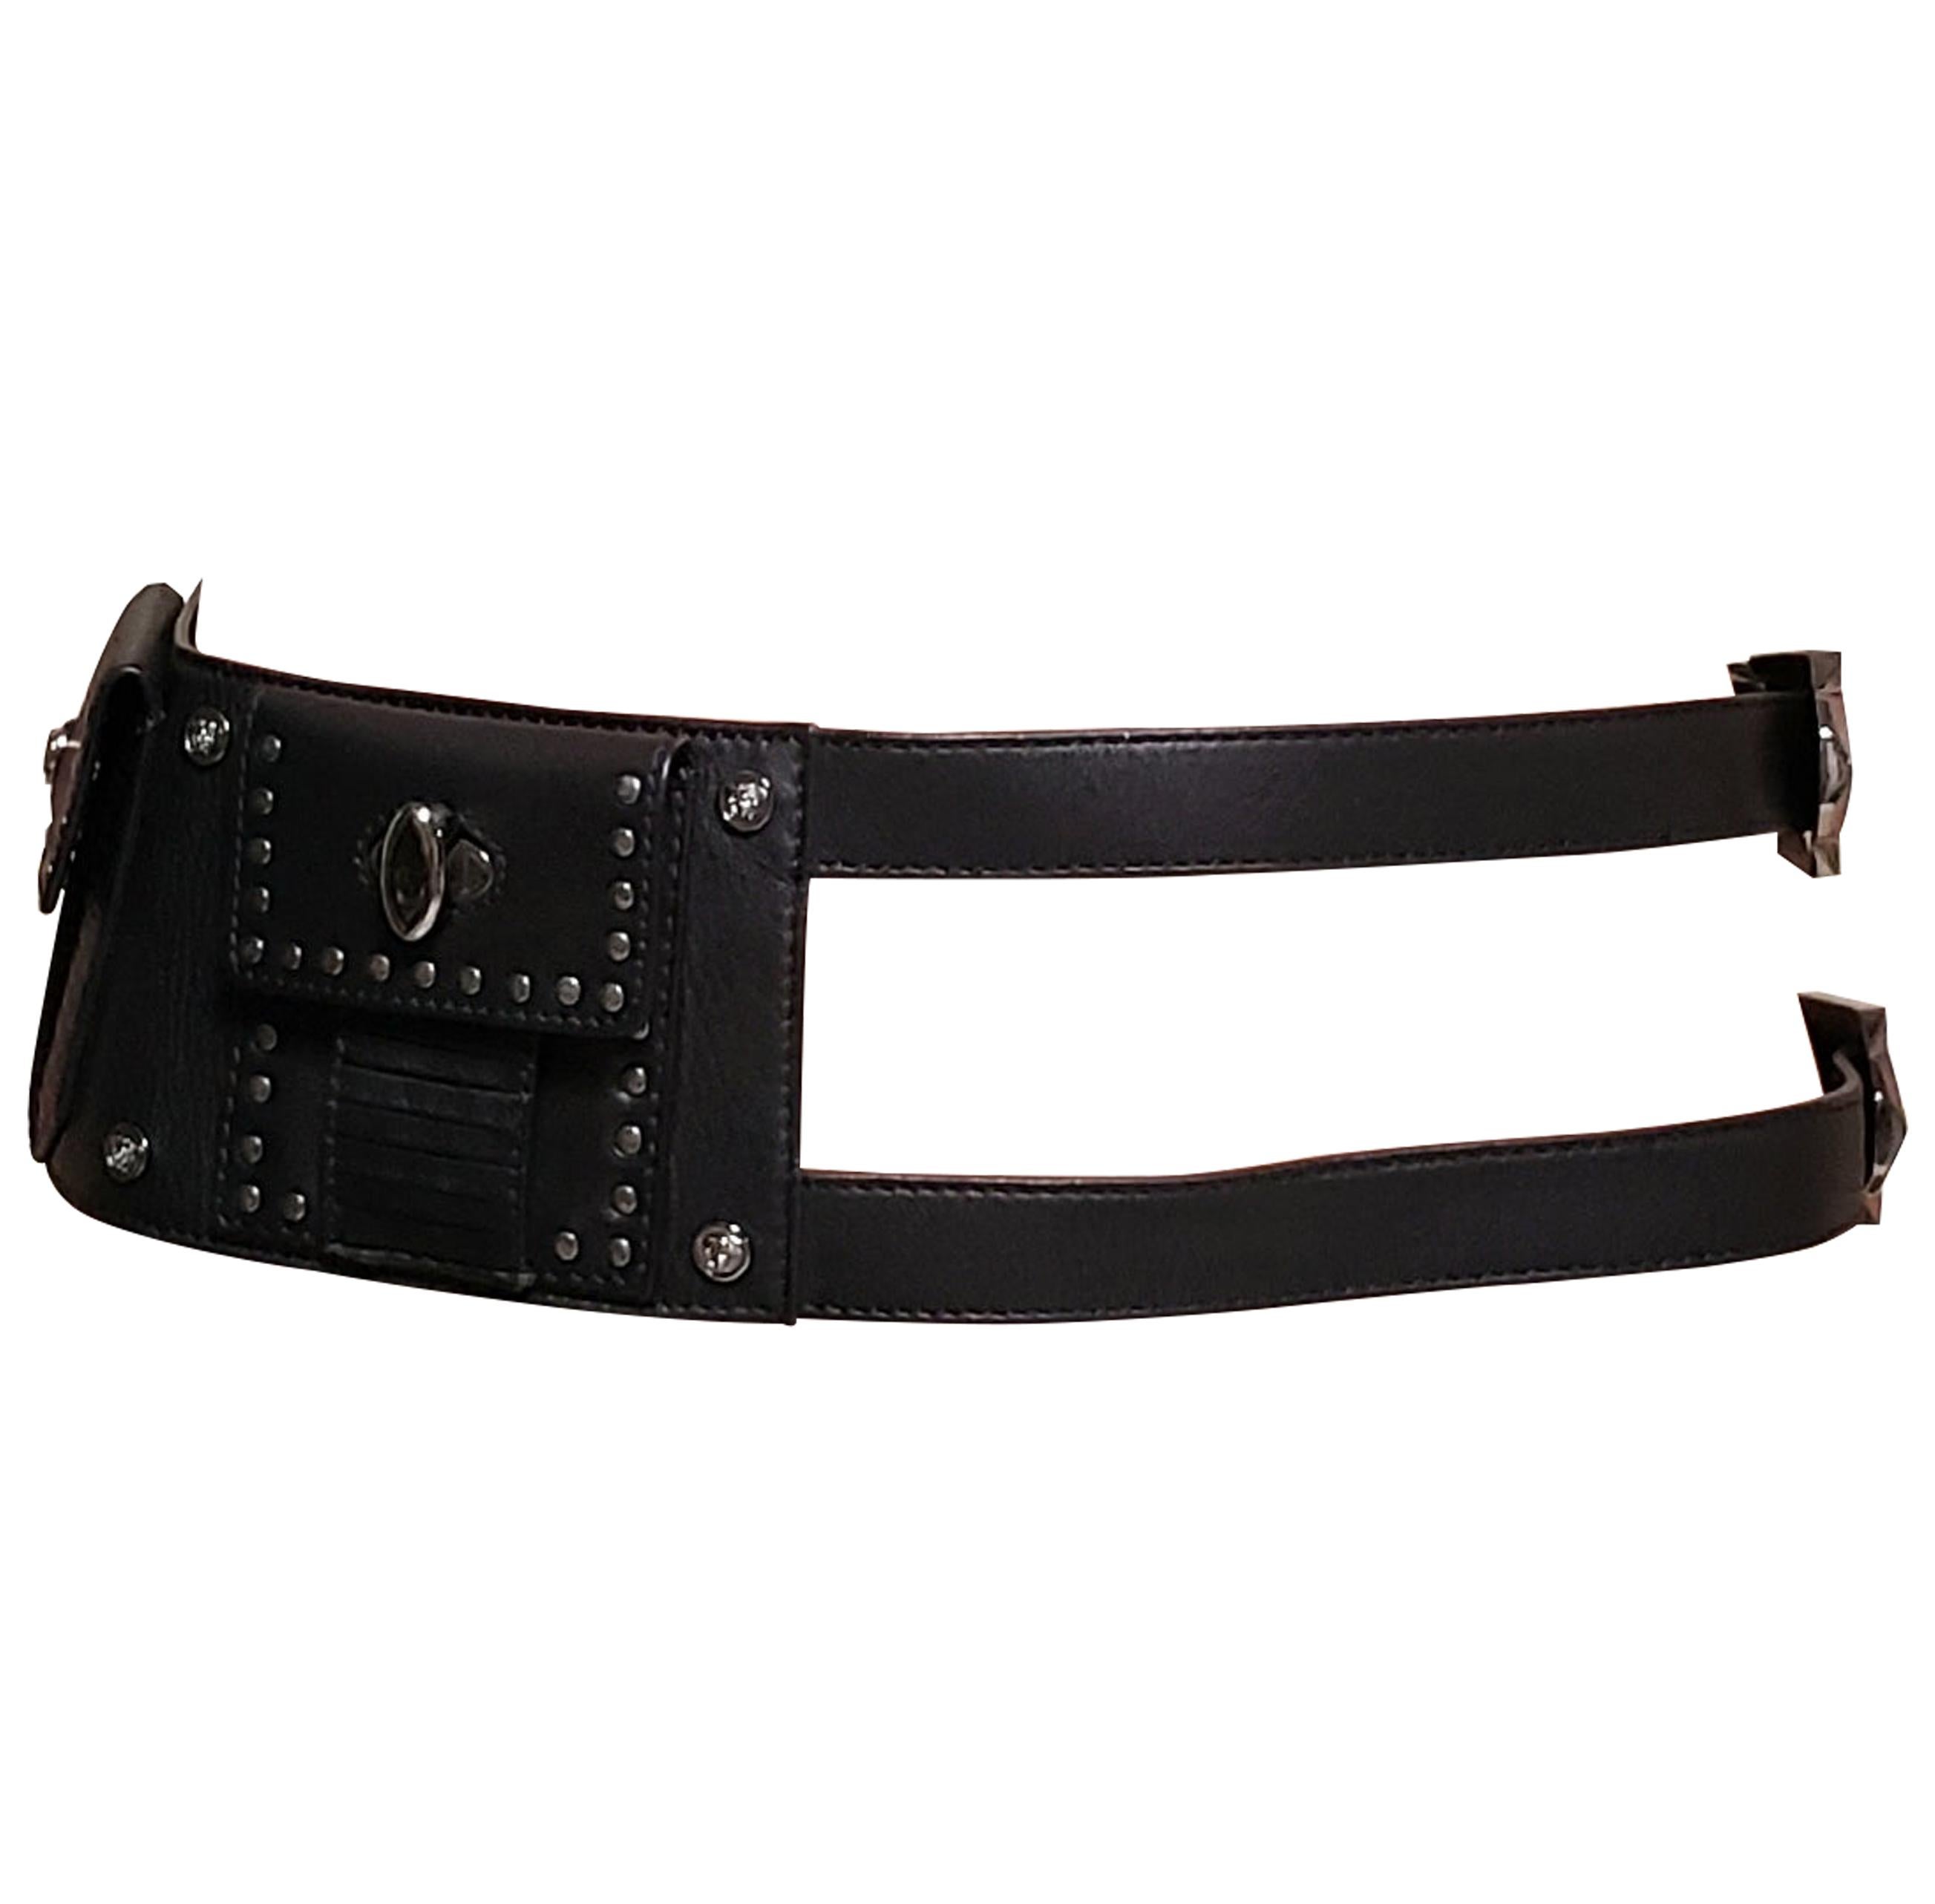 F/W 2011 Look #7 VERSACE BLACK LEATHER STUDDED BELT with MEDUSA BUCKLE 